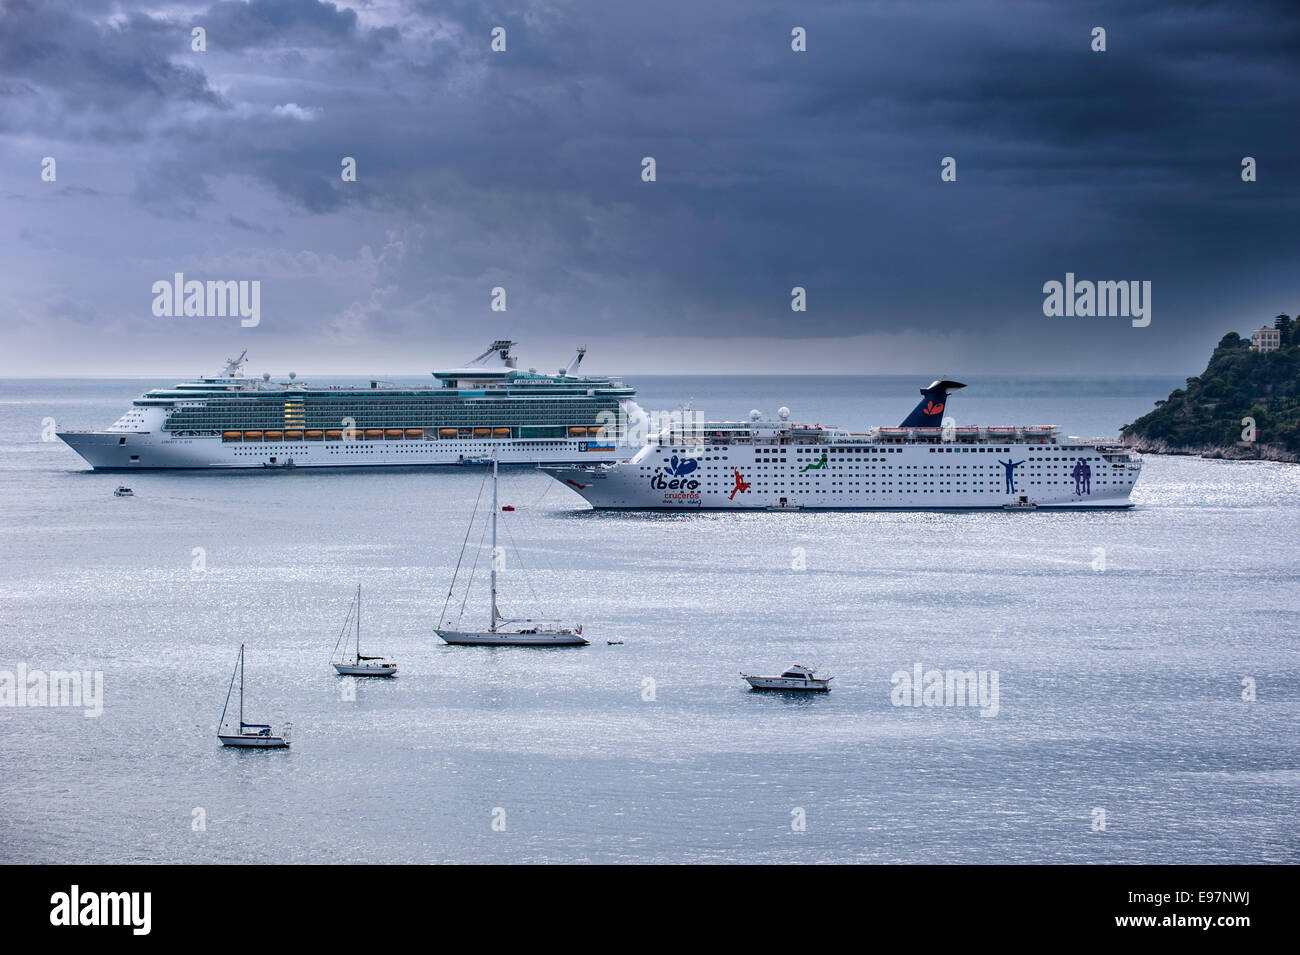 Sailing boats and two big luxurious cruise ships on the Mediterranean Sea along the French Riviera during bad weather, France Stock Photo